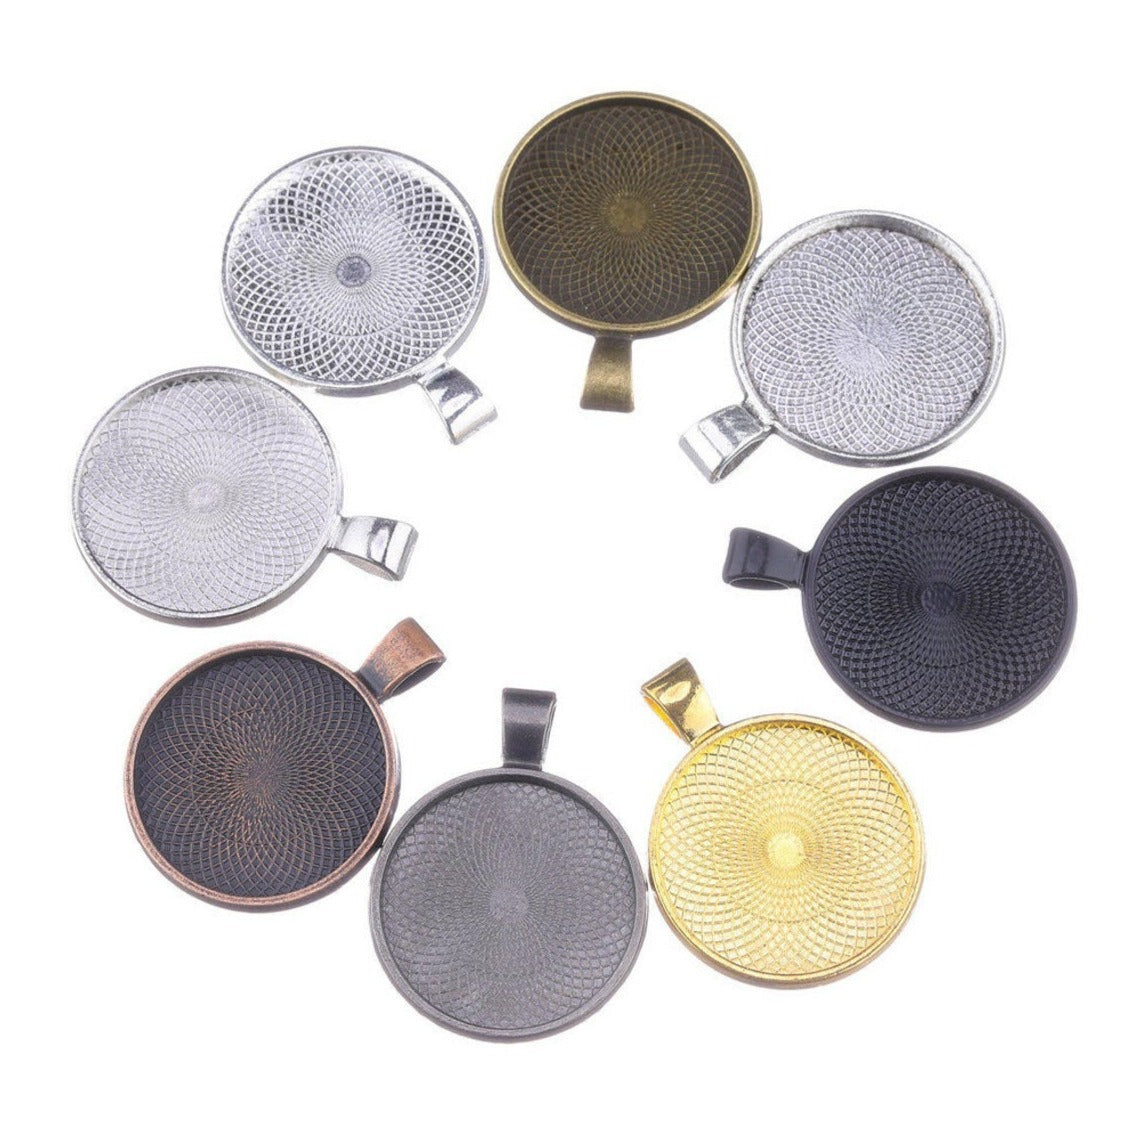 Pendant cabochon settings, flat round 25mm tray - Nickel free, lead free and cadmium free